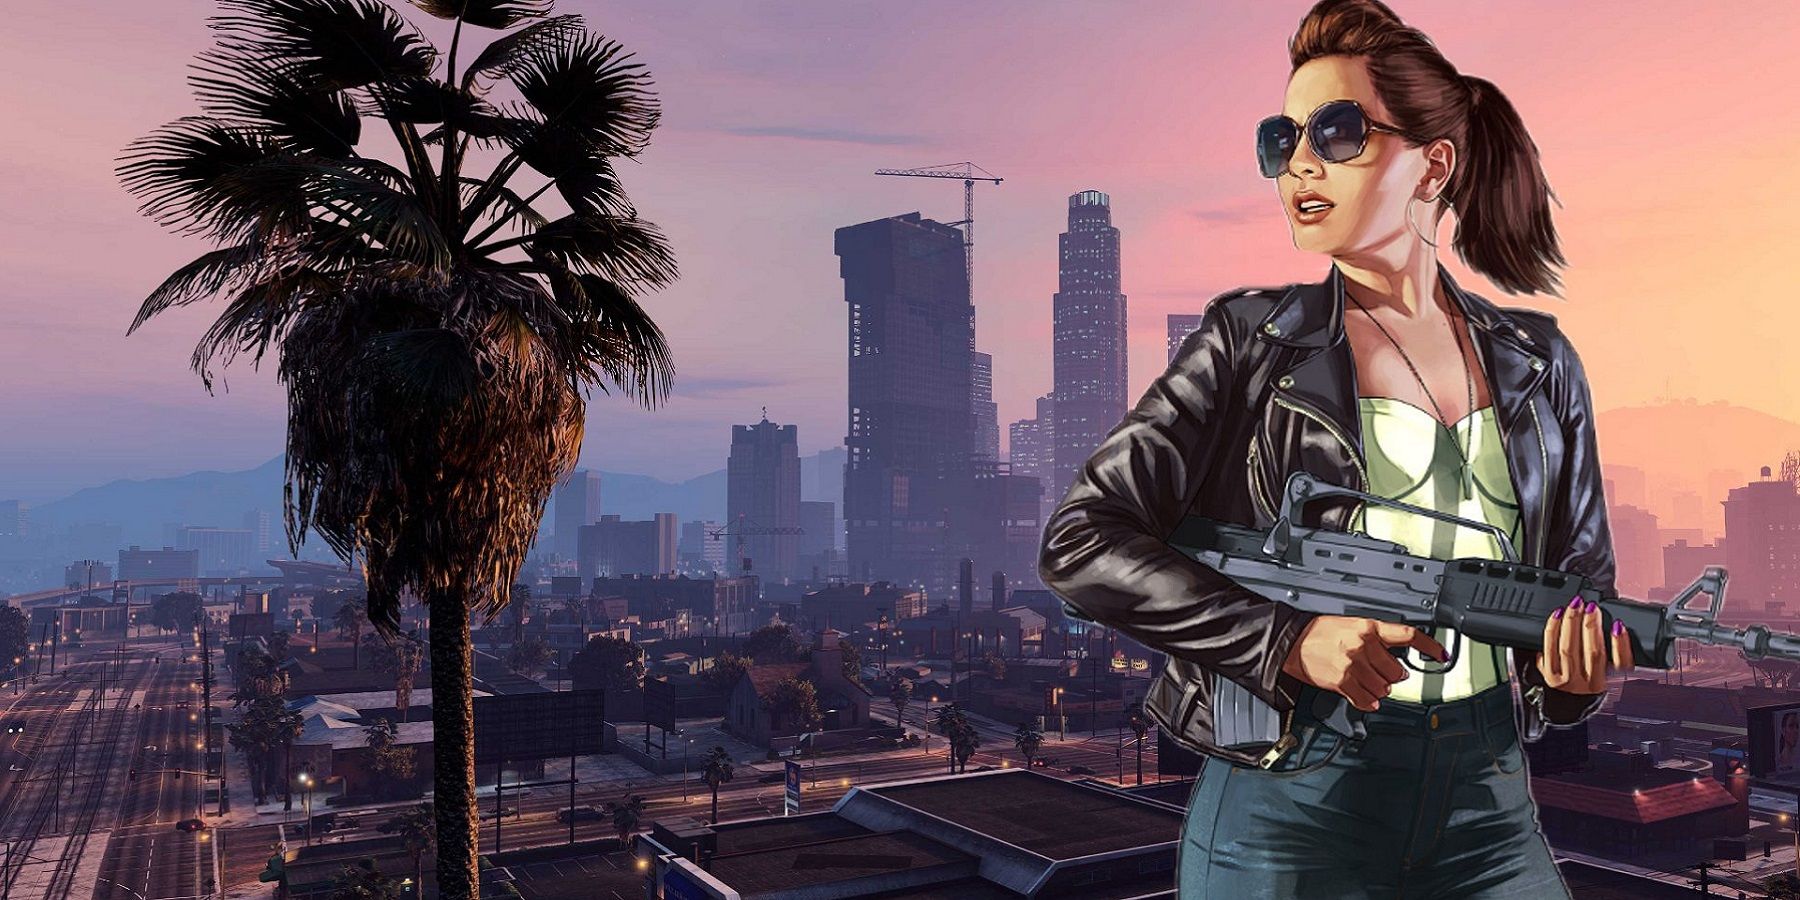 Image from a Grand Theft Auto city skyline showing a woman holding a gun.